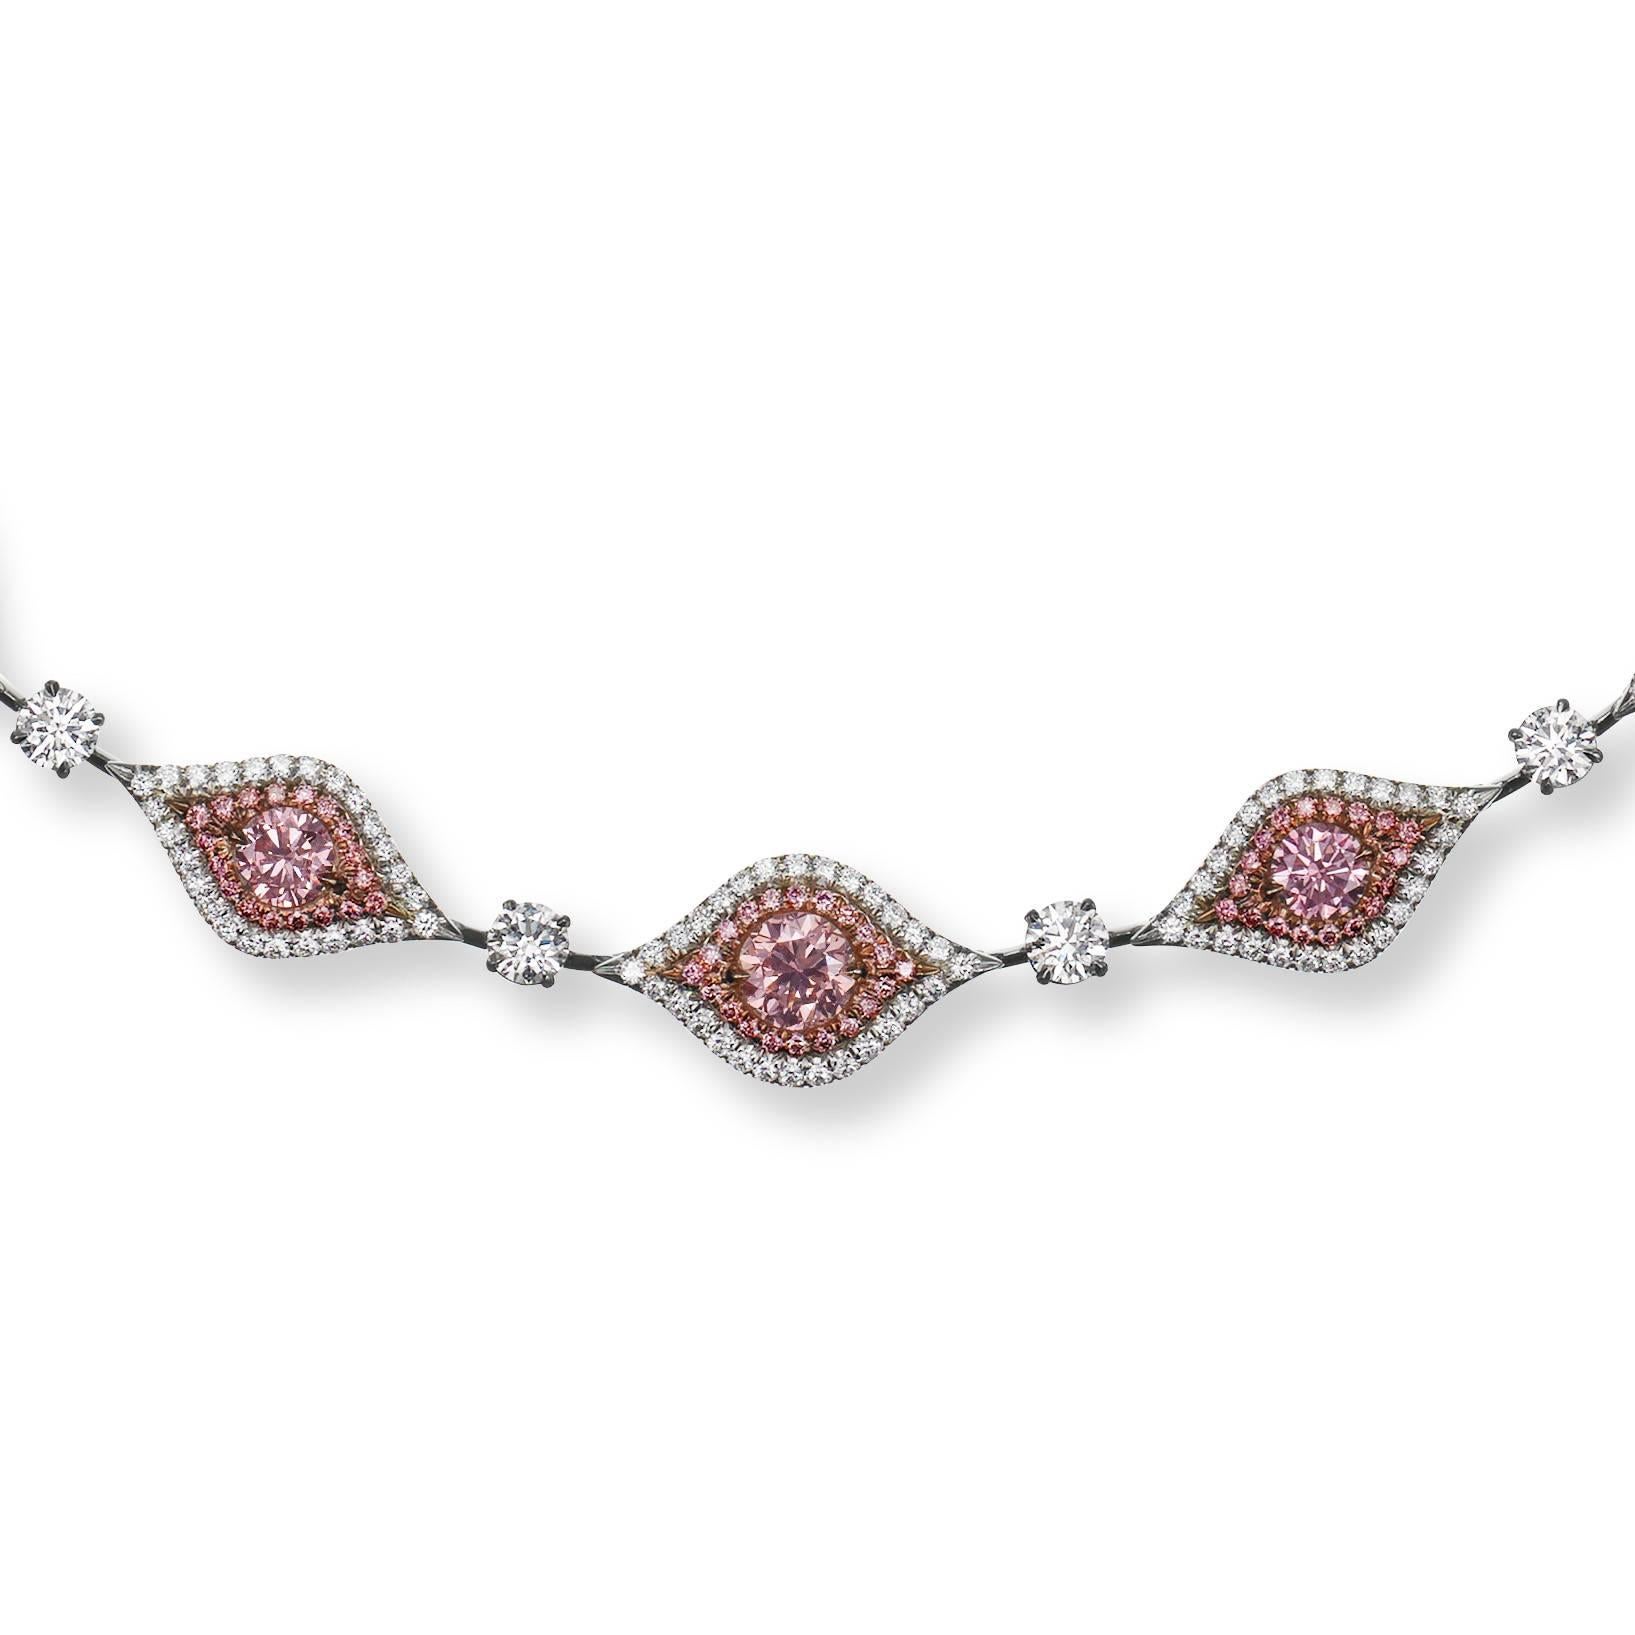 This on of a kind Platinum custom Fancy Intense Pink Diamond necklace features 16 graduated round Argyle Fancy Intense Pink Diamonds ranging in color from Fancy to Fancy Intense Pink and Intense purplish pink with a total weight of 5.80 carats